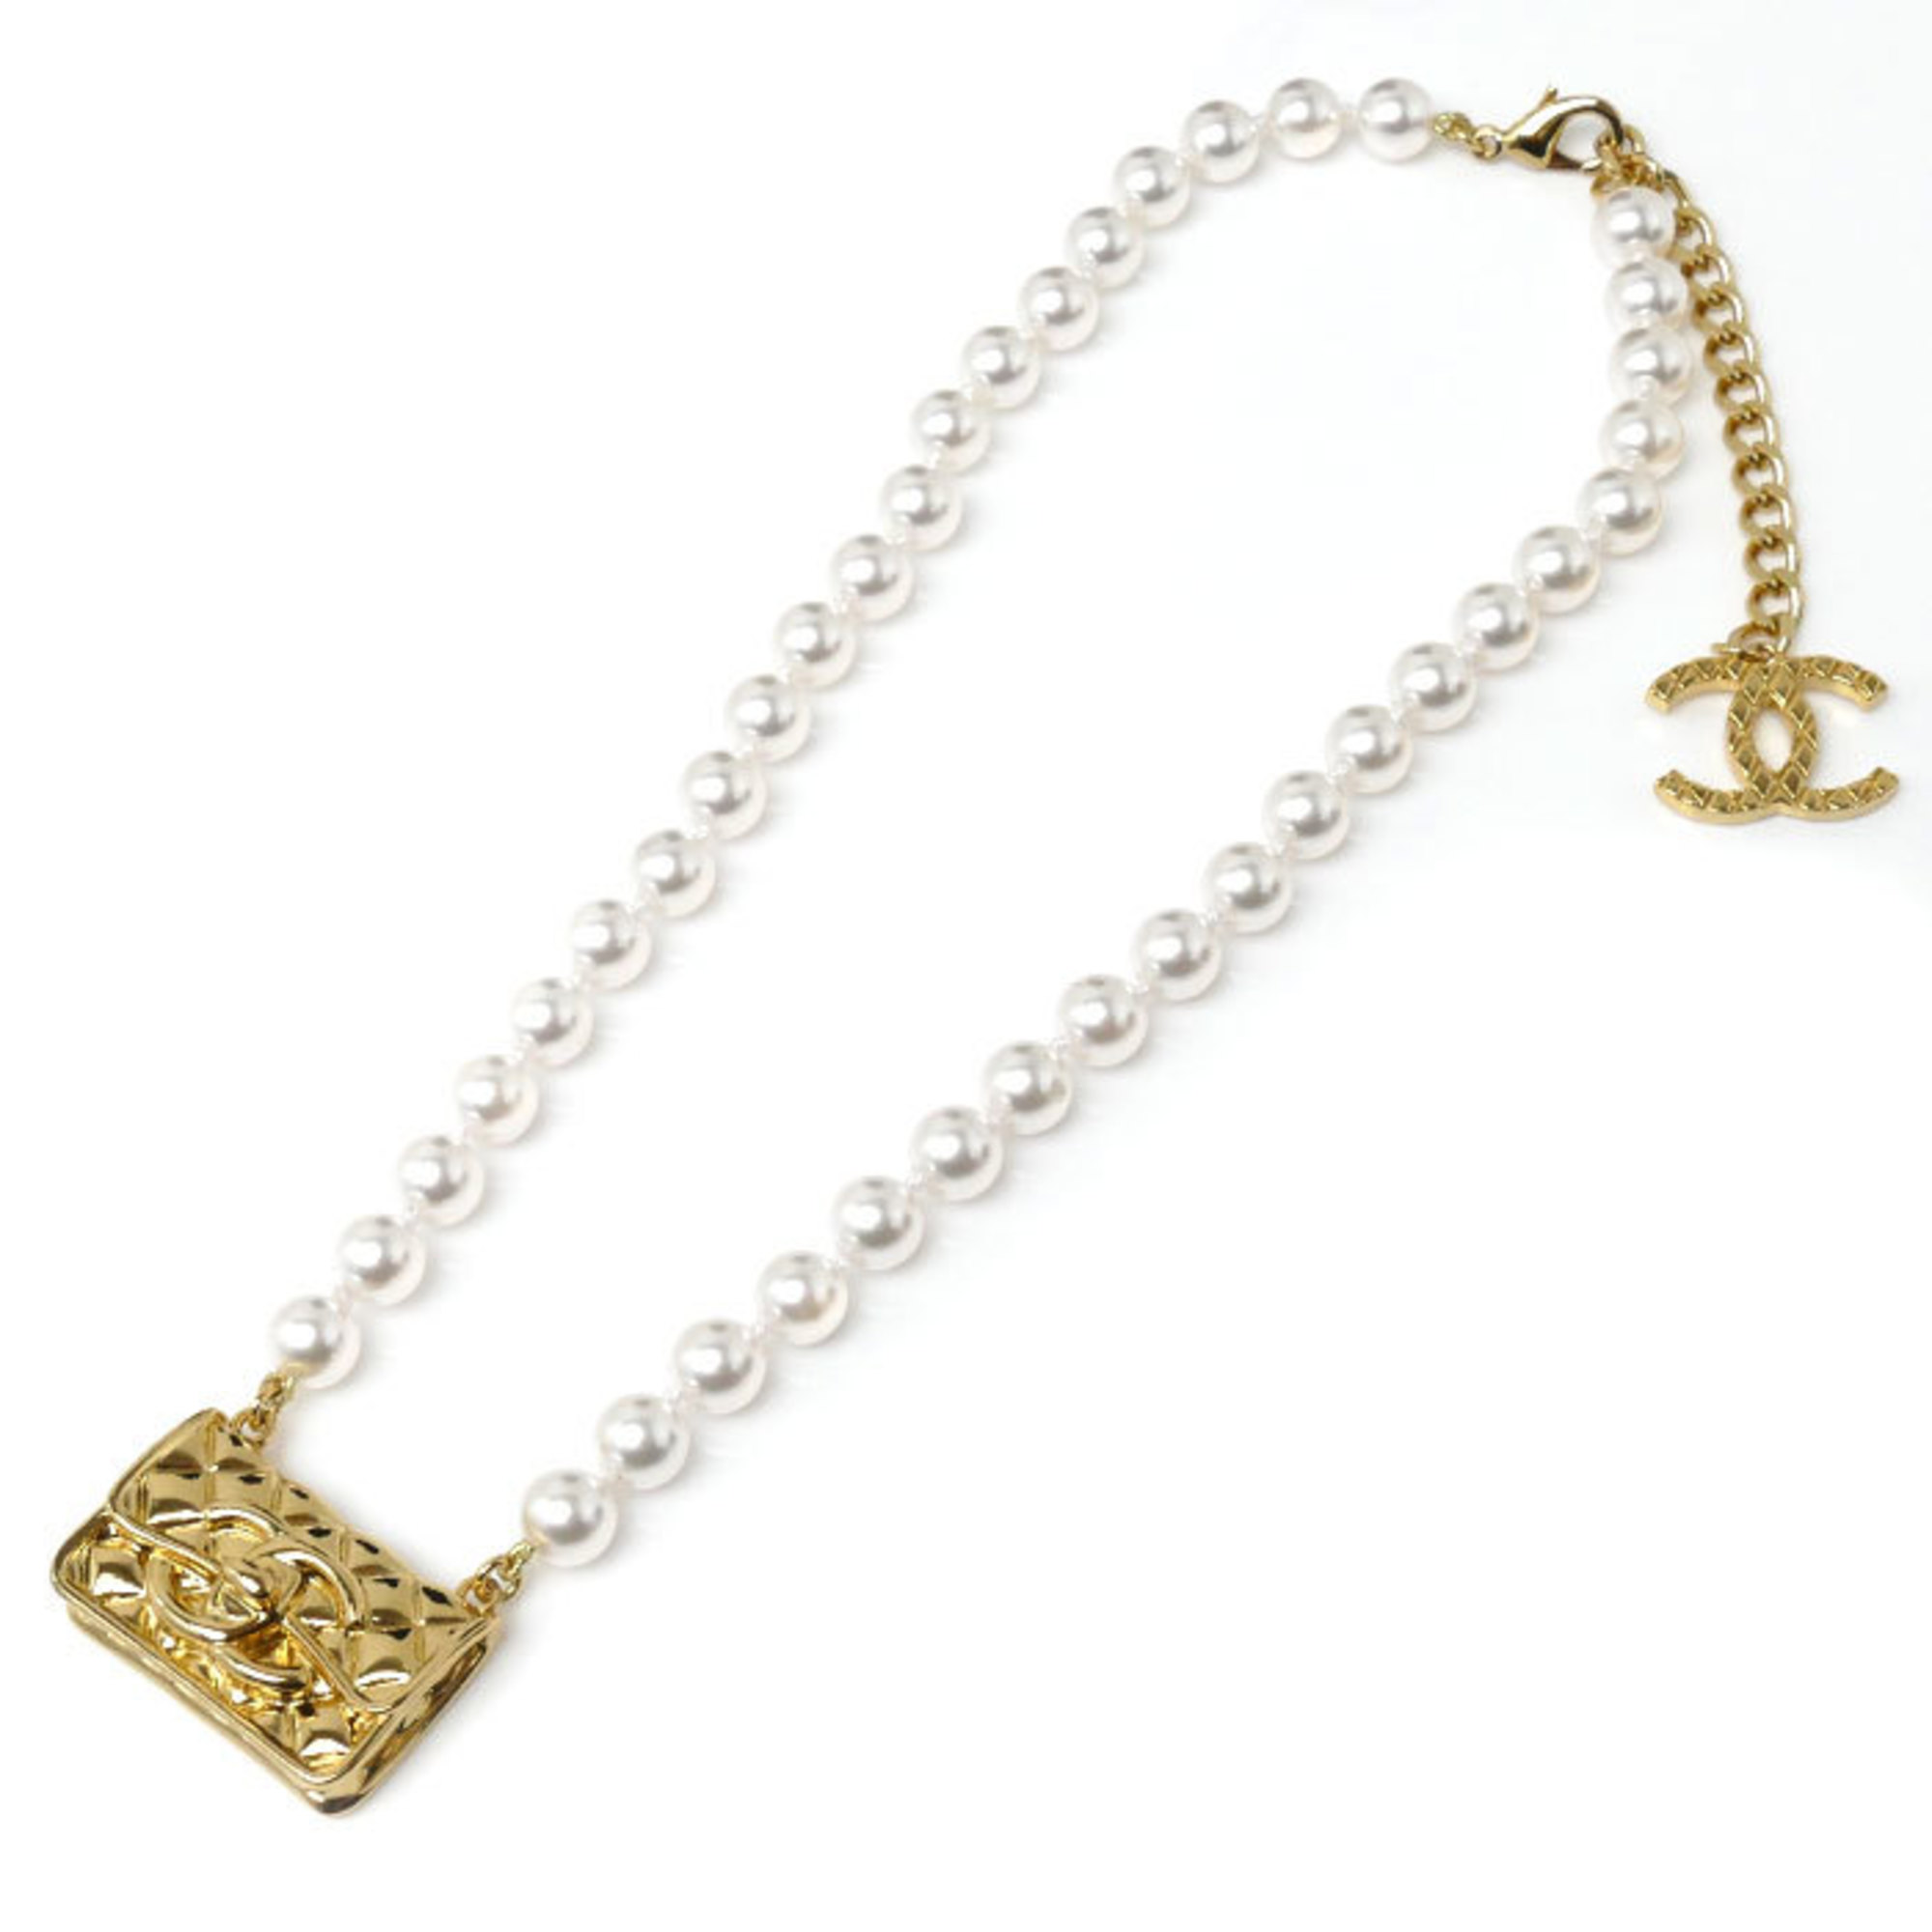 CHANEL Chanel Matelasse Resin Pearl Necklace ABB847 41.5-48cm Ladies